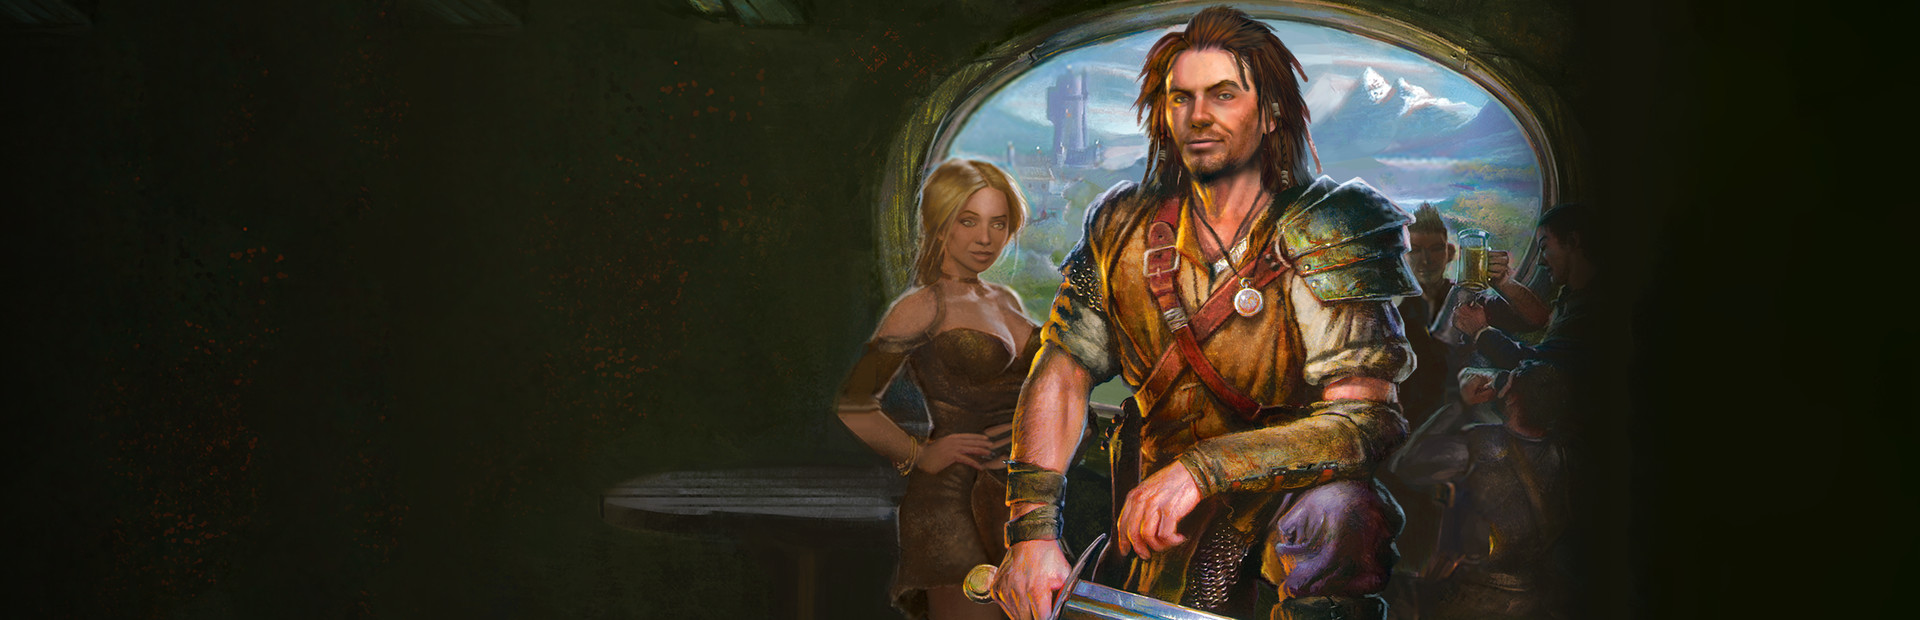 The Bard's Tale ARPG: Remastered and Resnarkled cover image